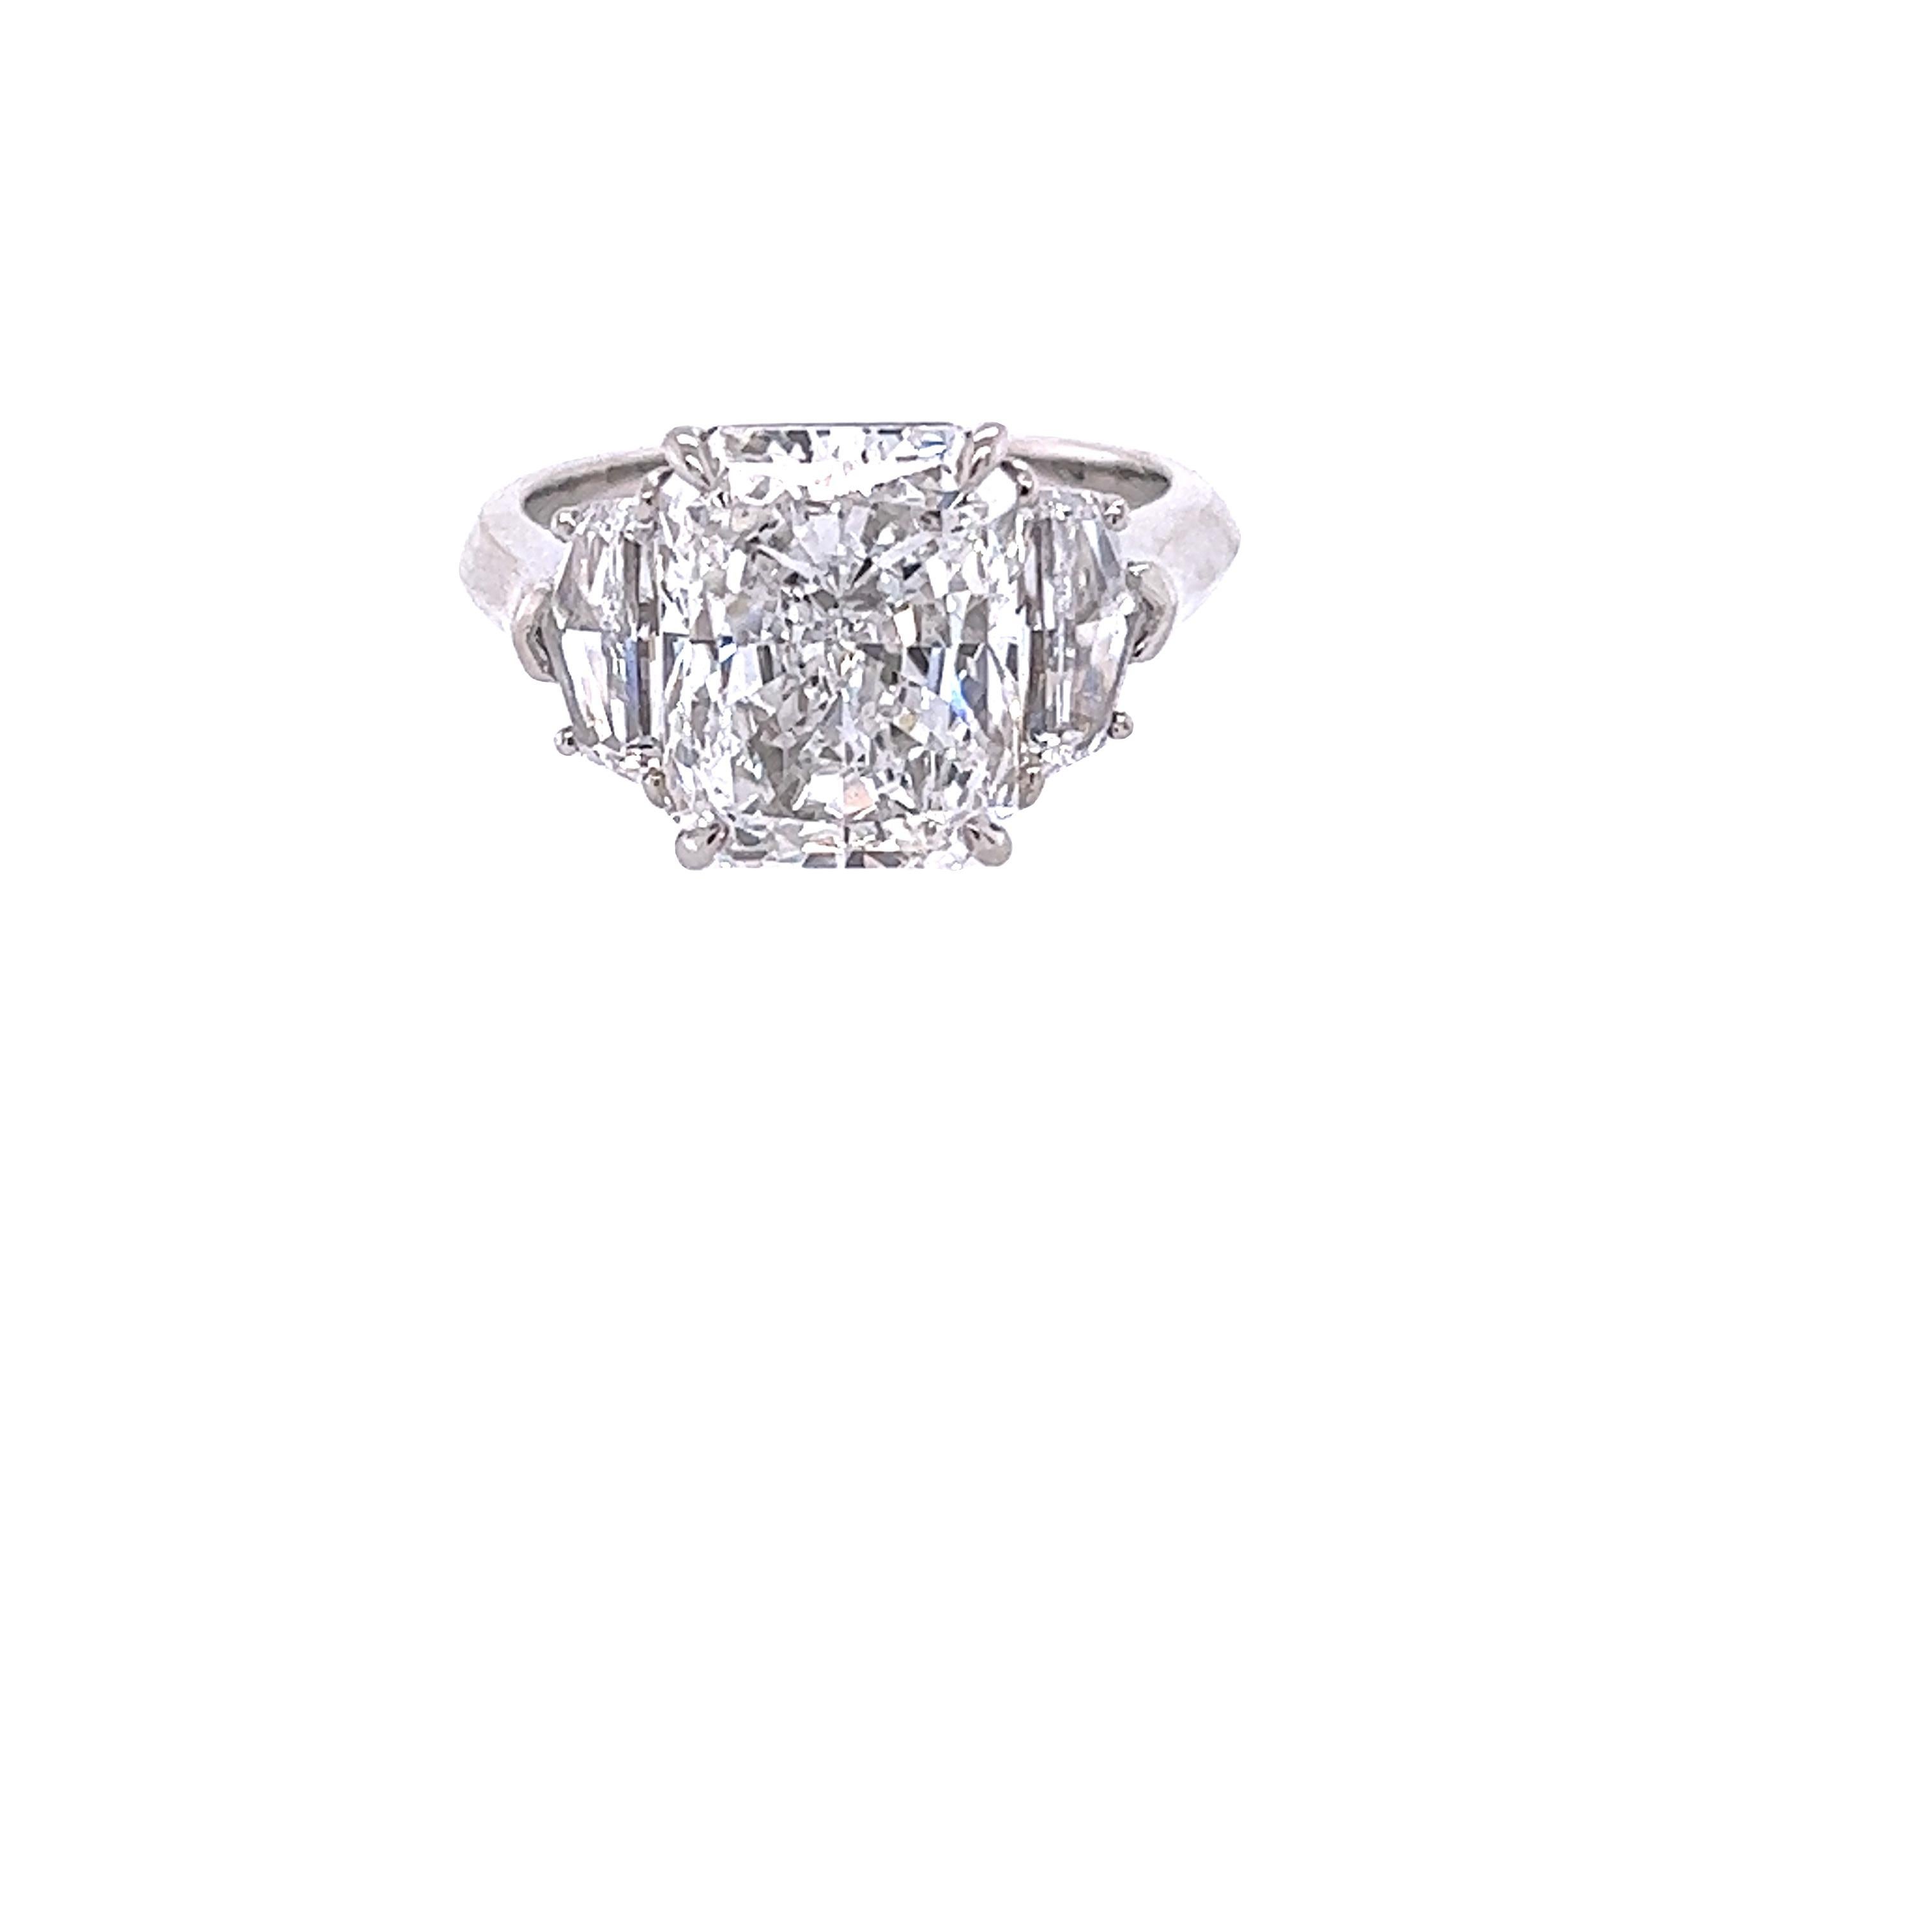 Rosenberg Diamonds & Co. 5.01 carat Emerald cut F color SI1 clarity is accompanied by a GIA certificate. This spectacular Radiant is set in a handmade platinum setting with perfectly matched pair of epauletts side stones flanking on both sides with